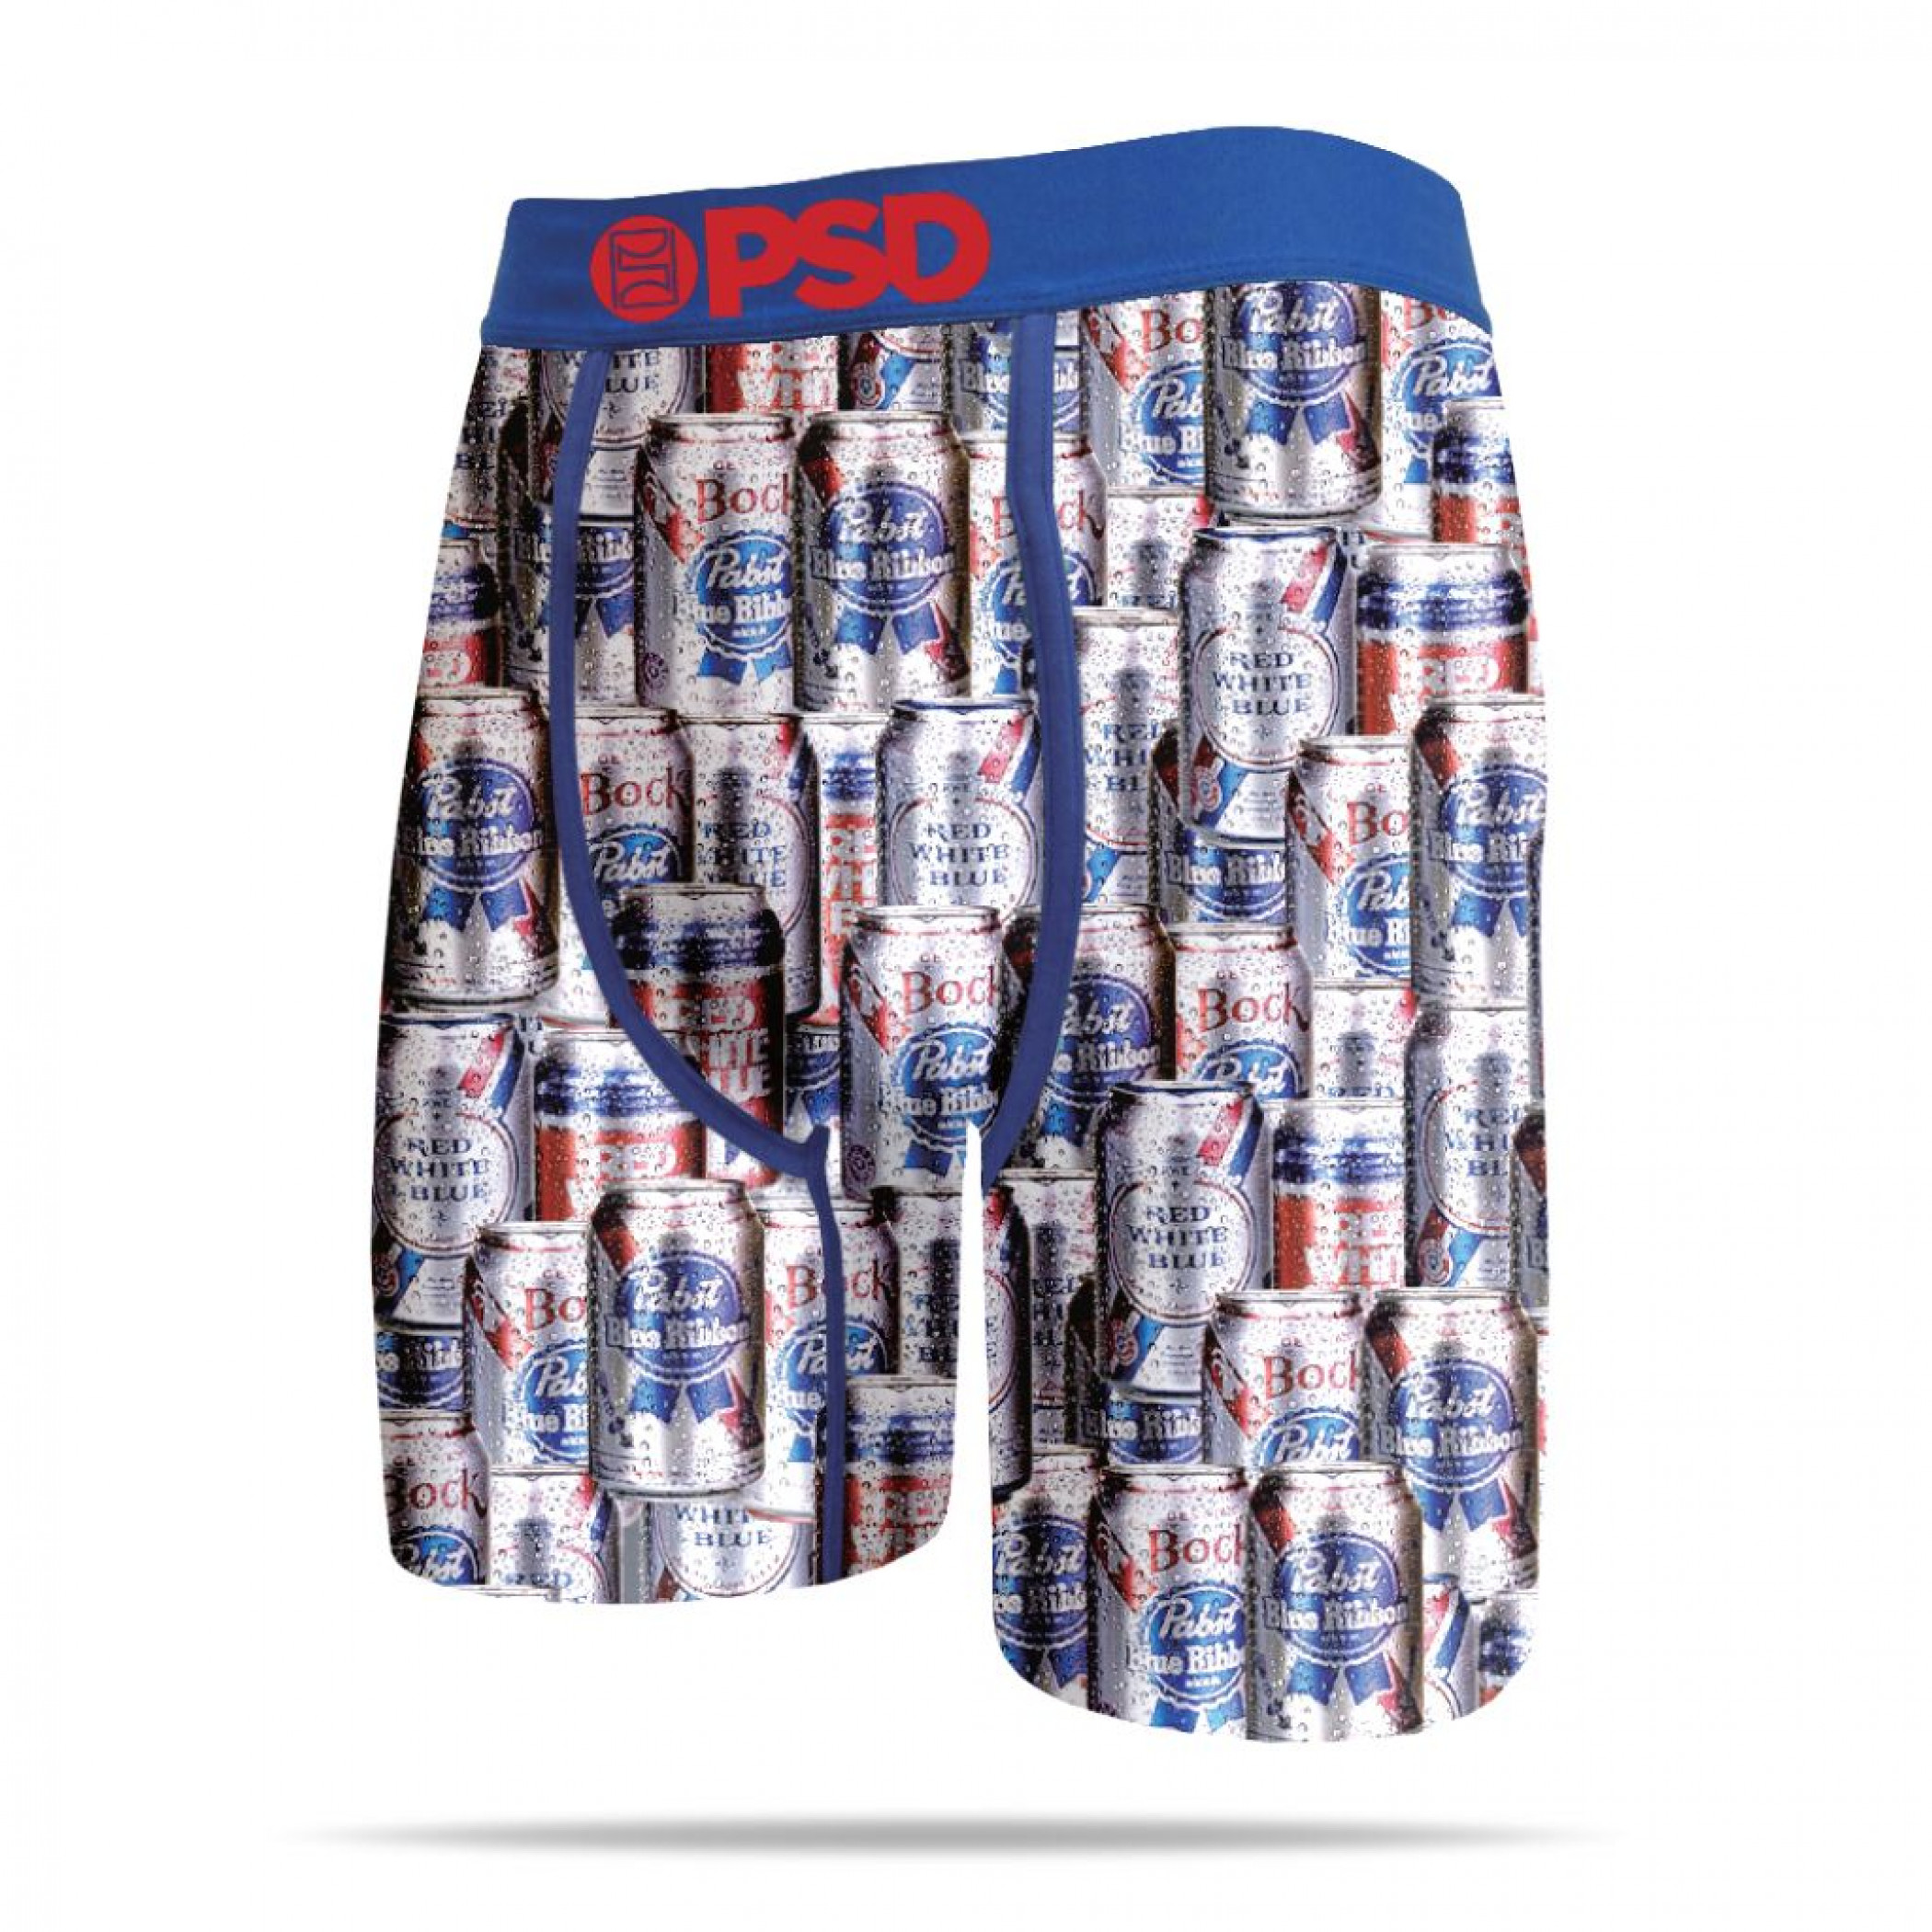 Pabst Blue Ribbon Beer Cans All Over Print Men's Boxer Briefs